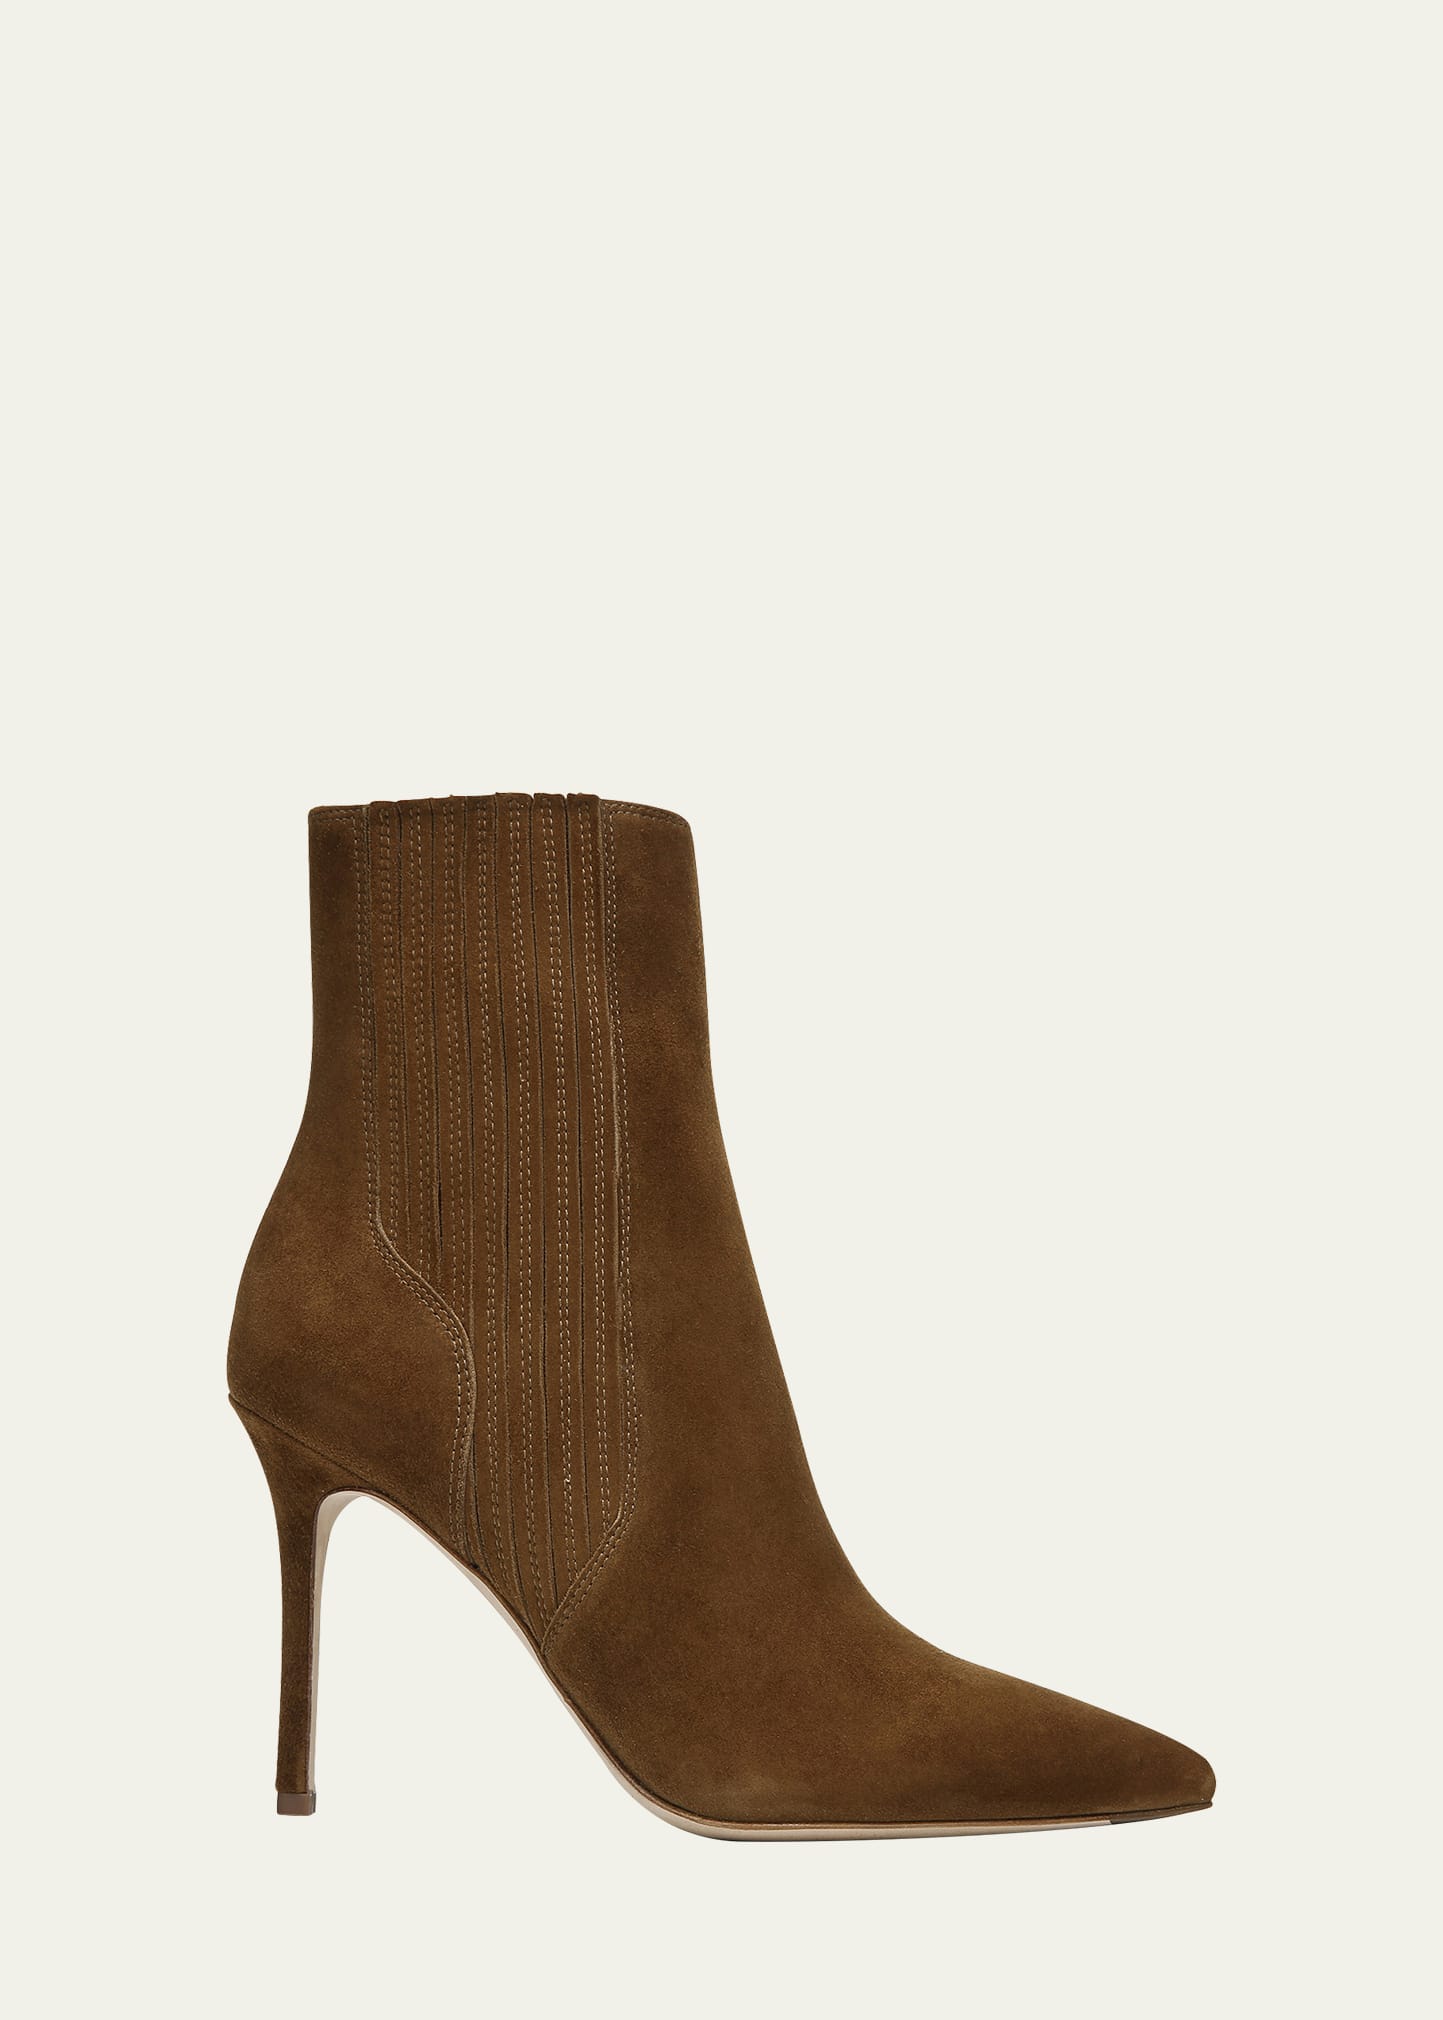 Lisa Suede Stiletto Ankle Booties